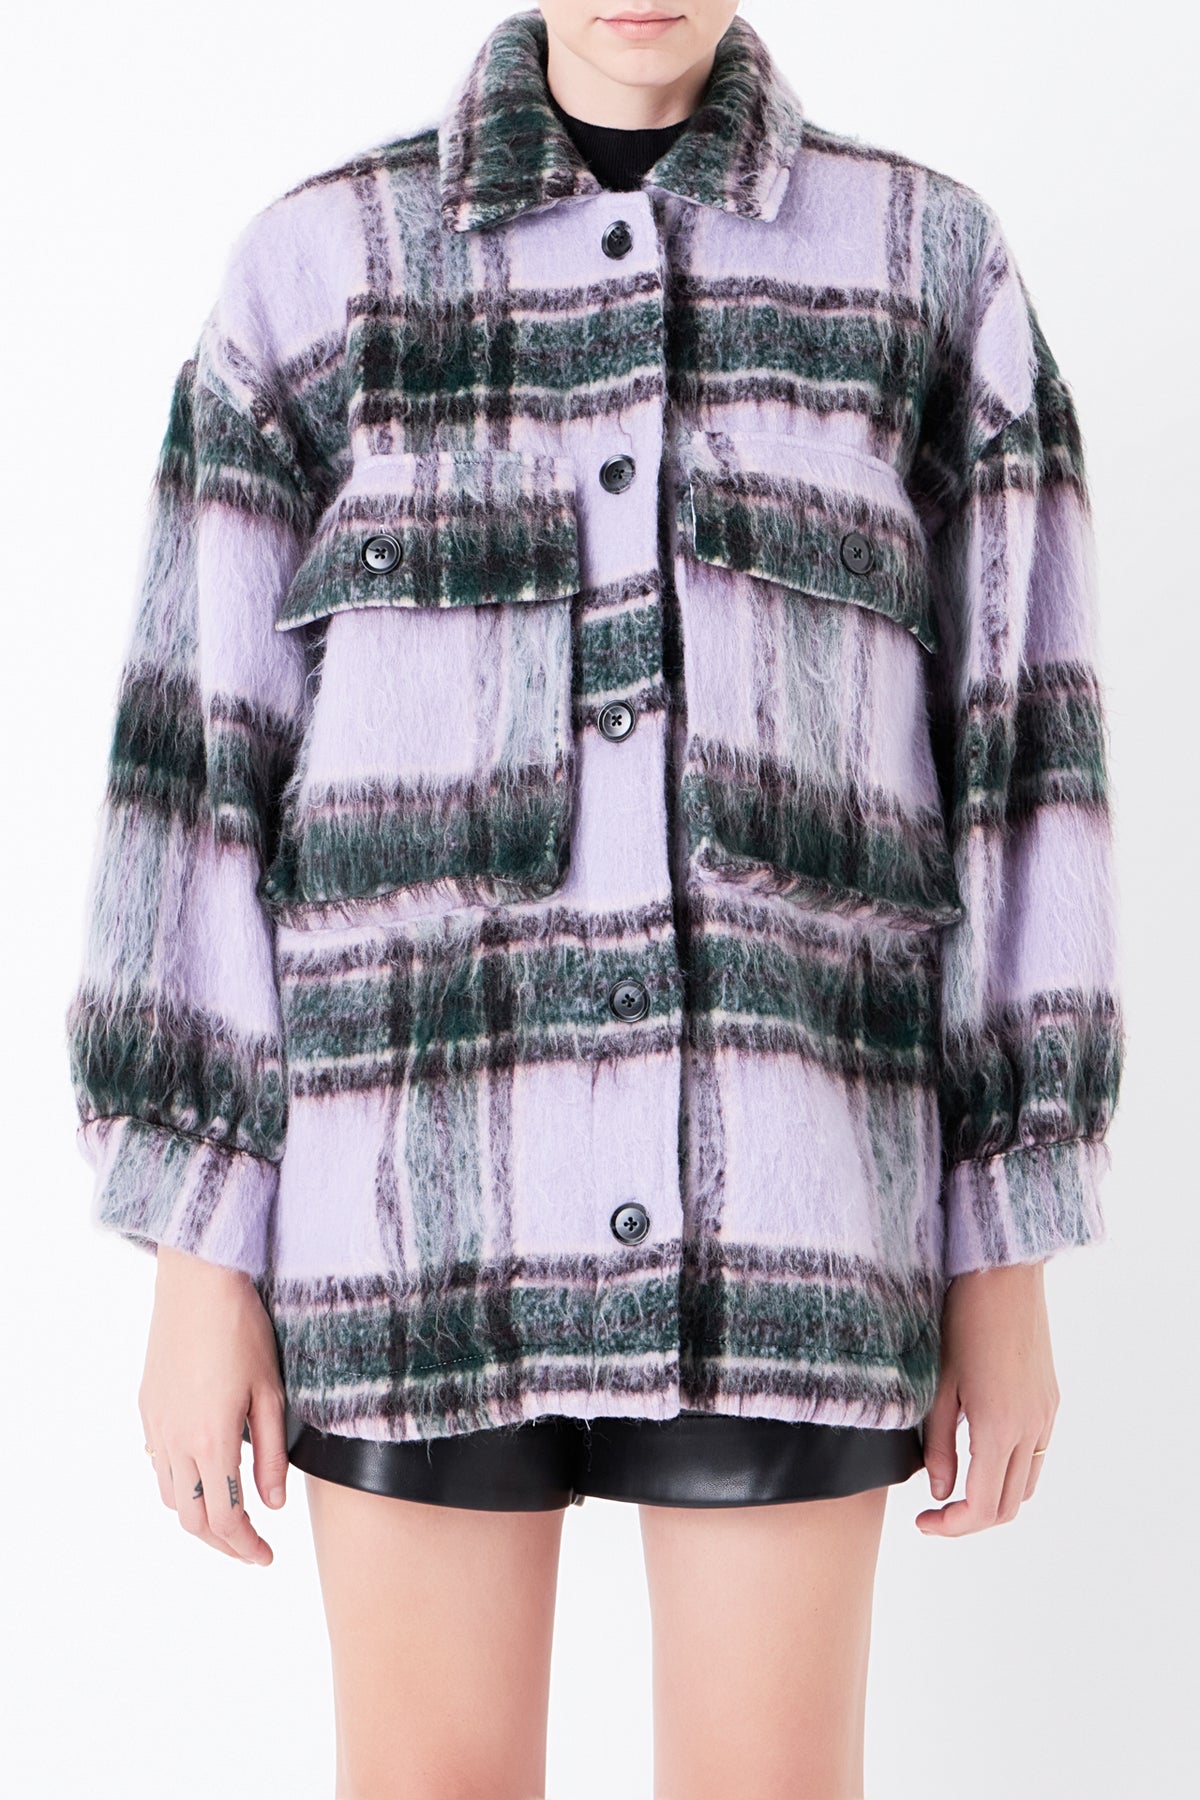 GREY LAB - Oversized Plaid Shacket with Pockets - COATS available at Objectrare